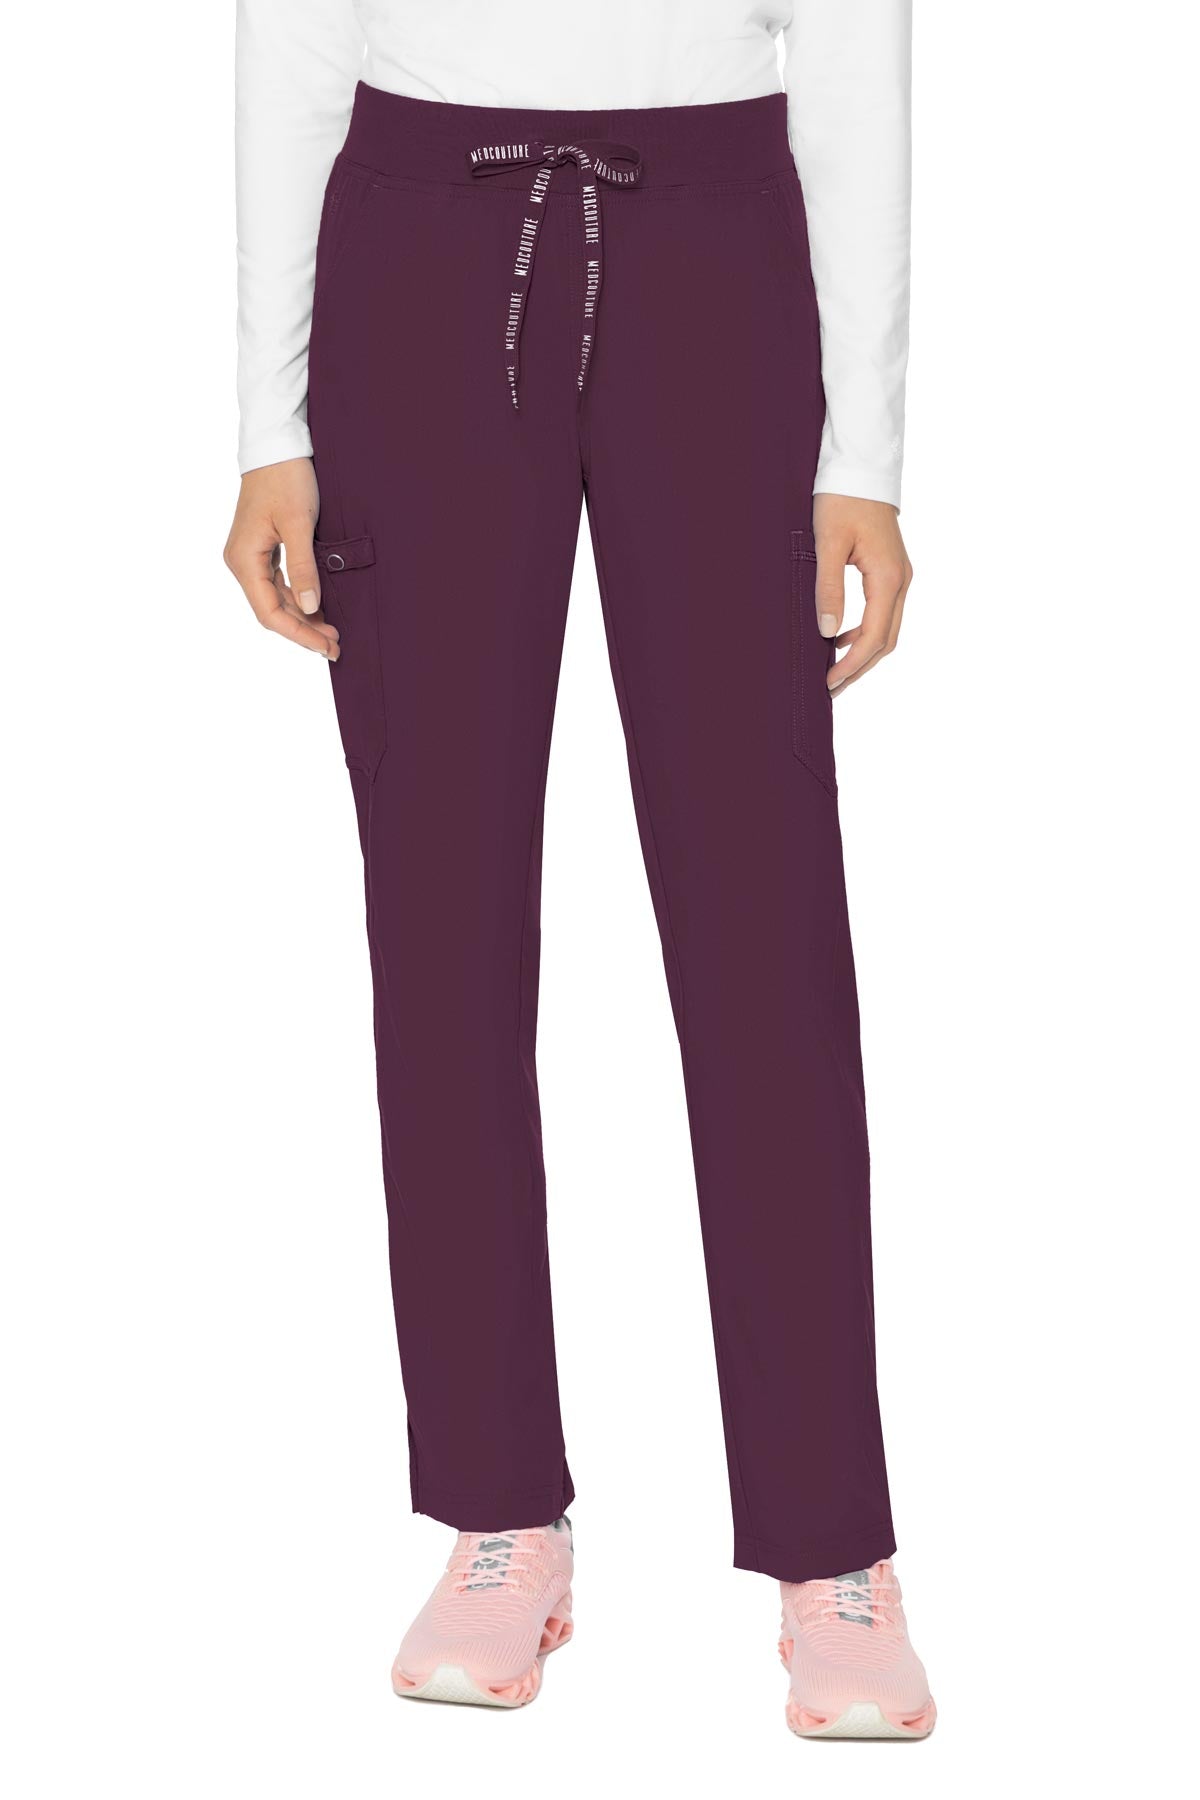 Med Couture Wine PANT